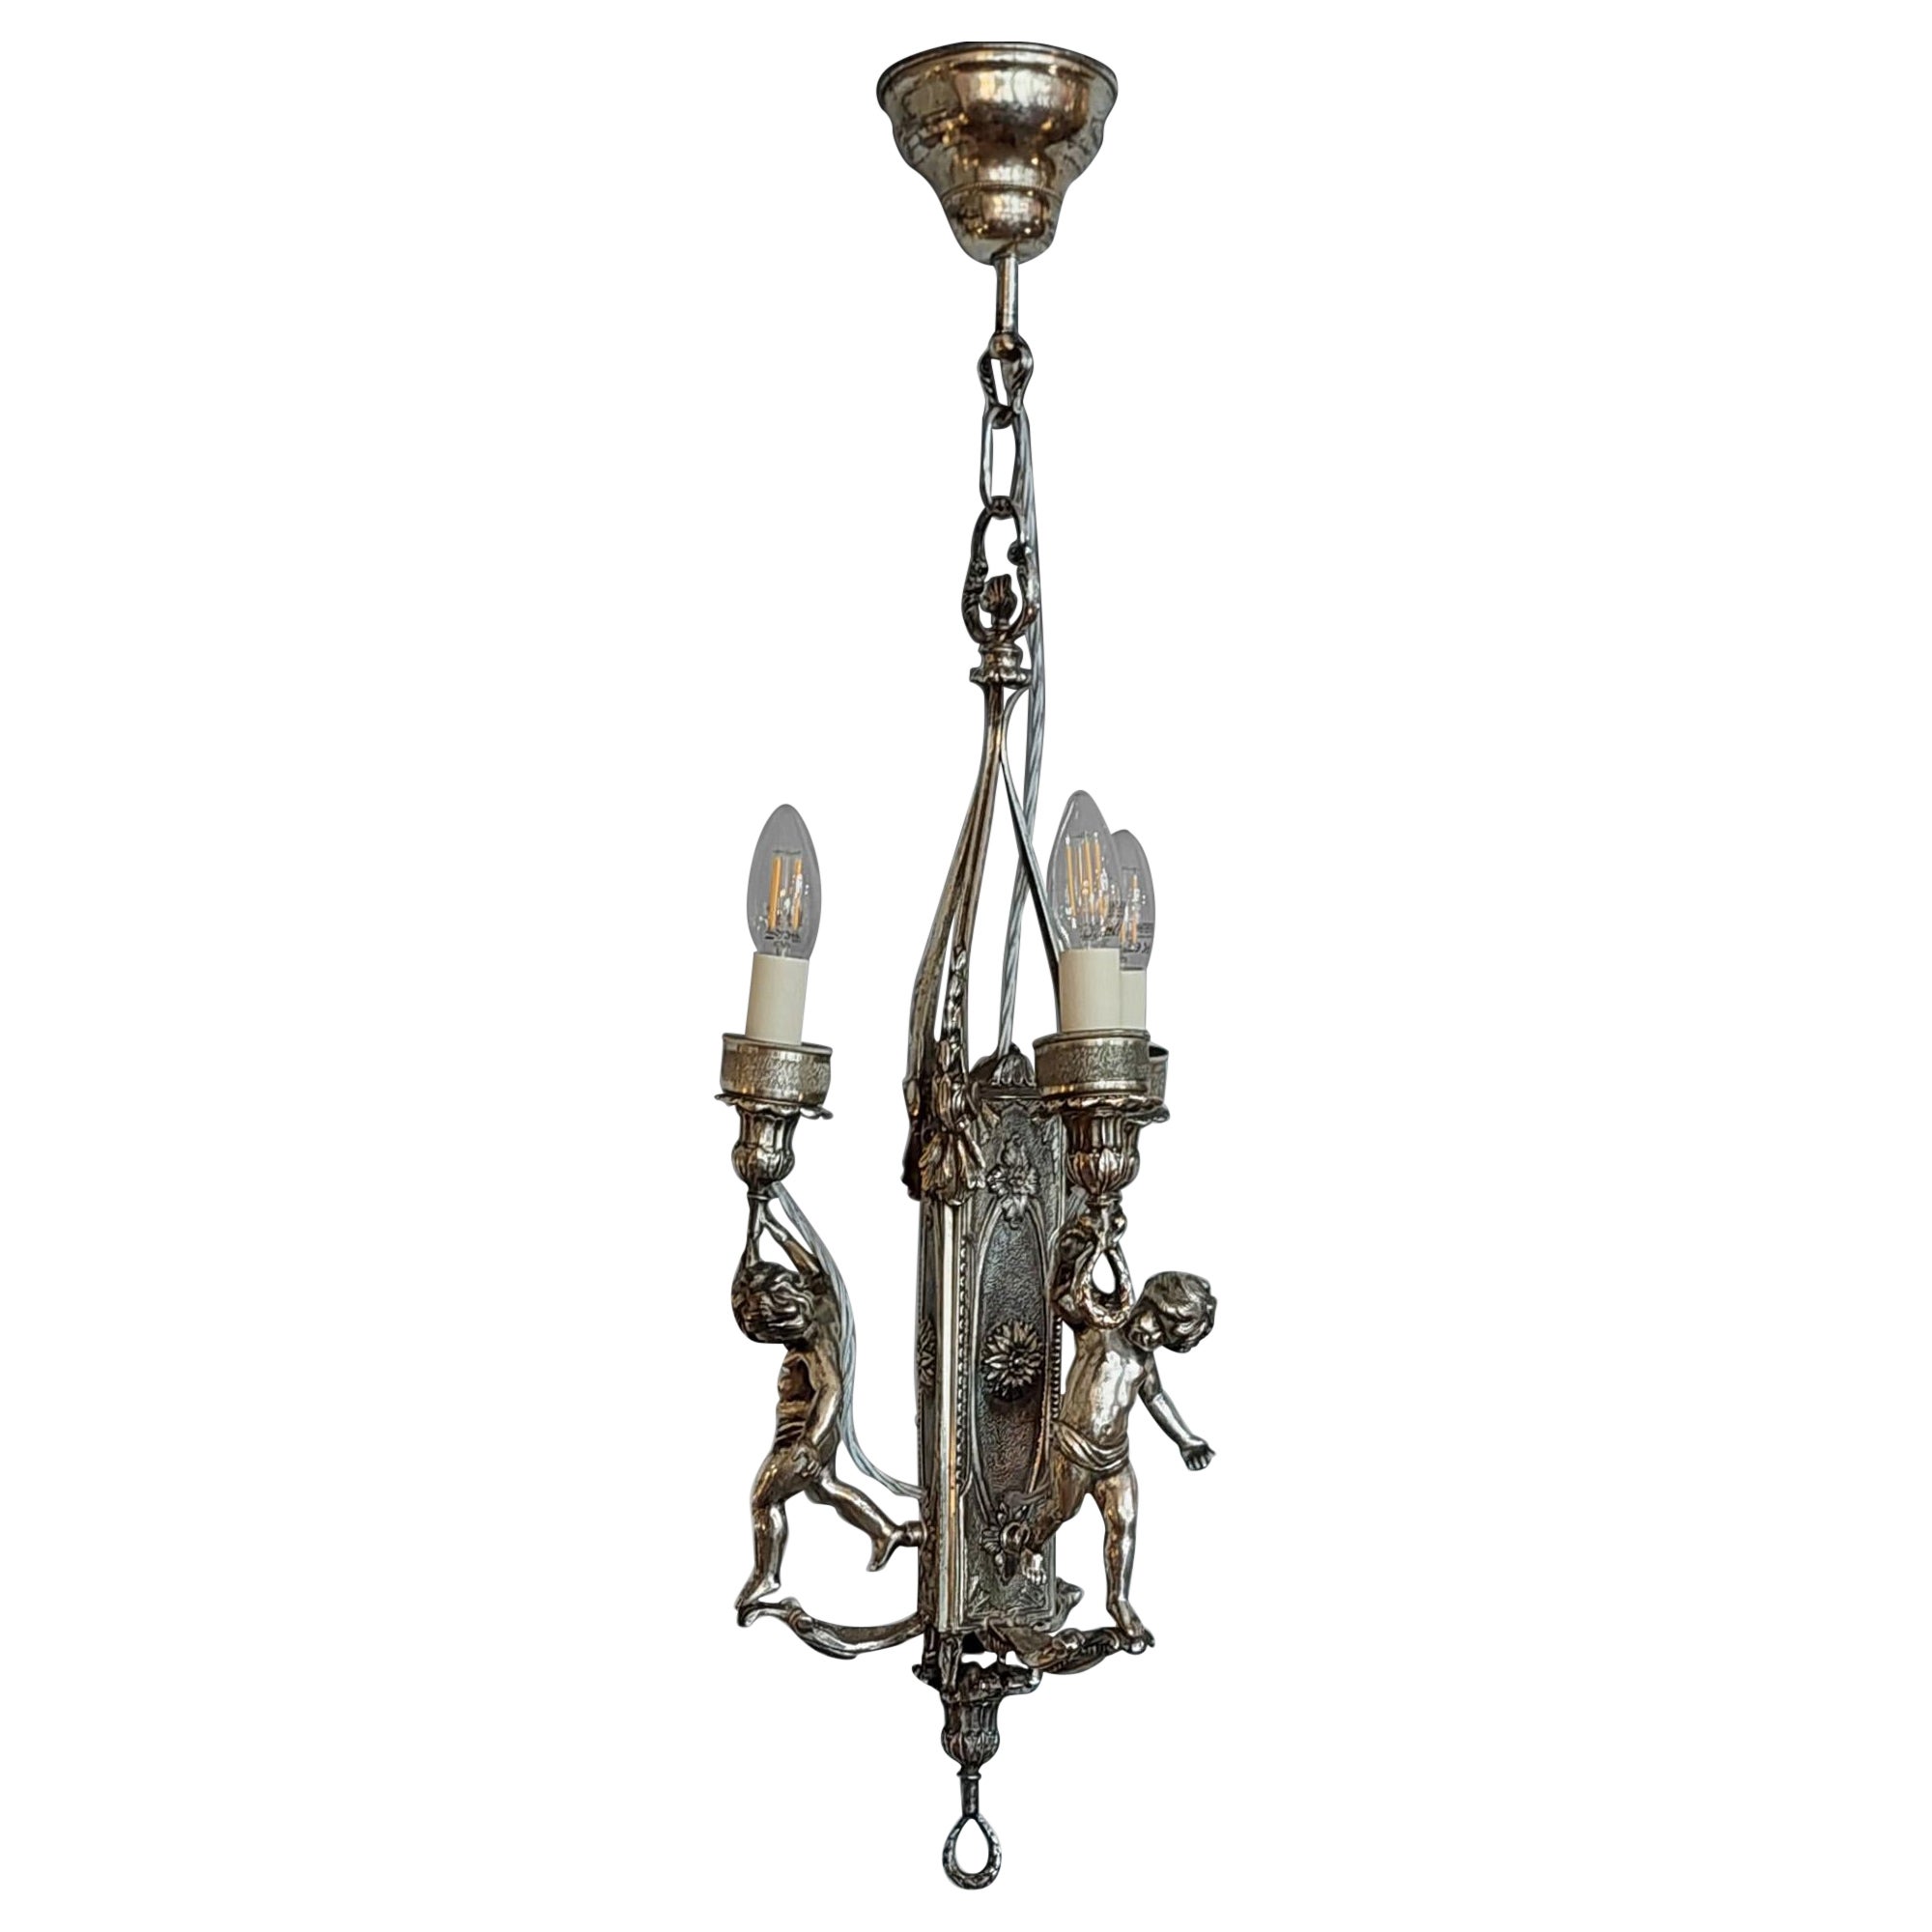 Mid 19thC Silver Plated Ceiling Candle Light Fitting